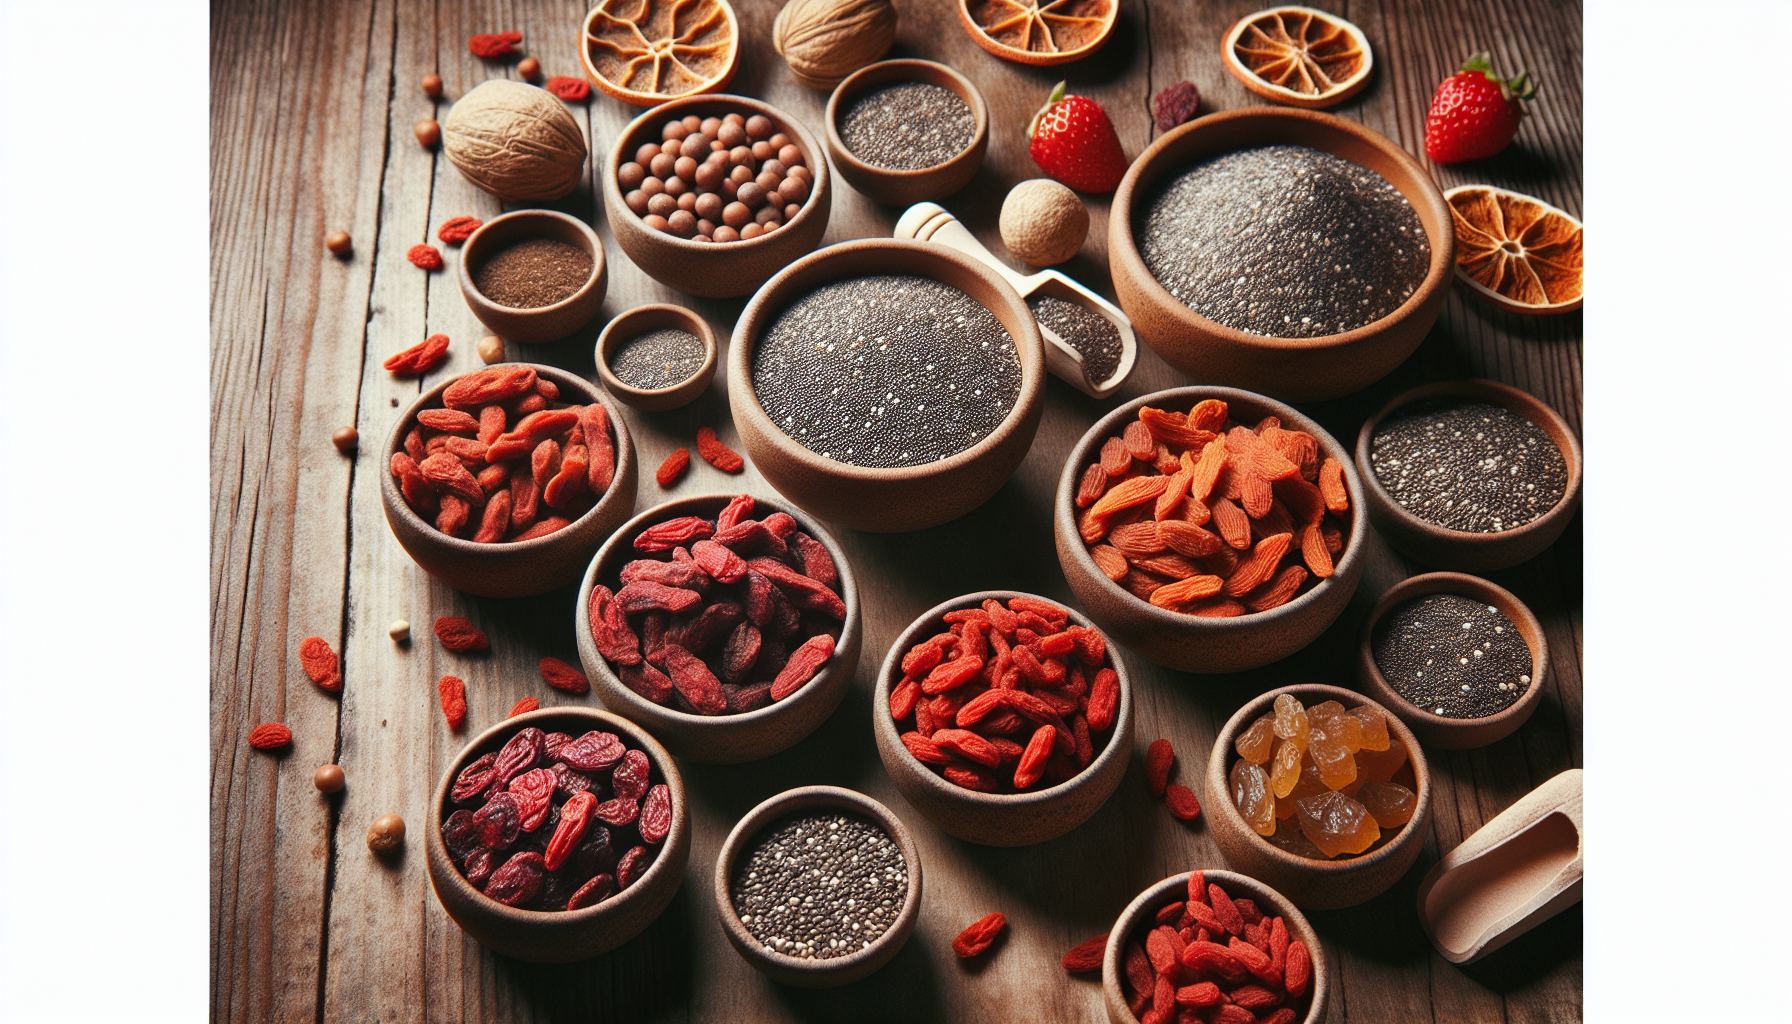 Colorful assortment of superfoods